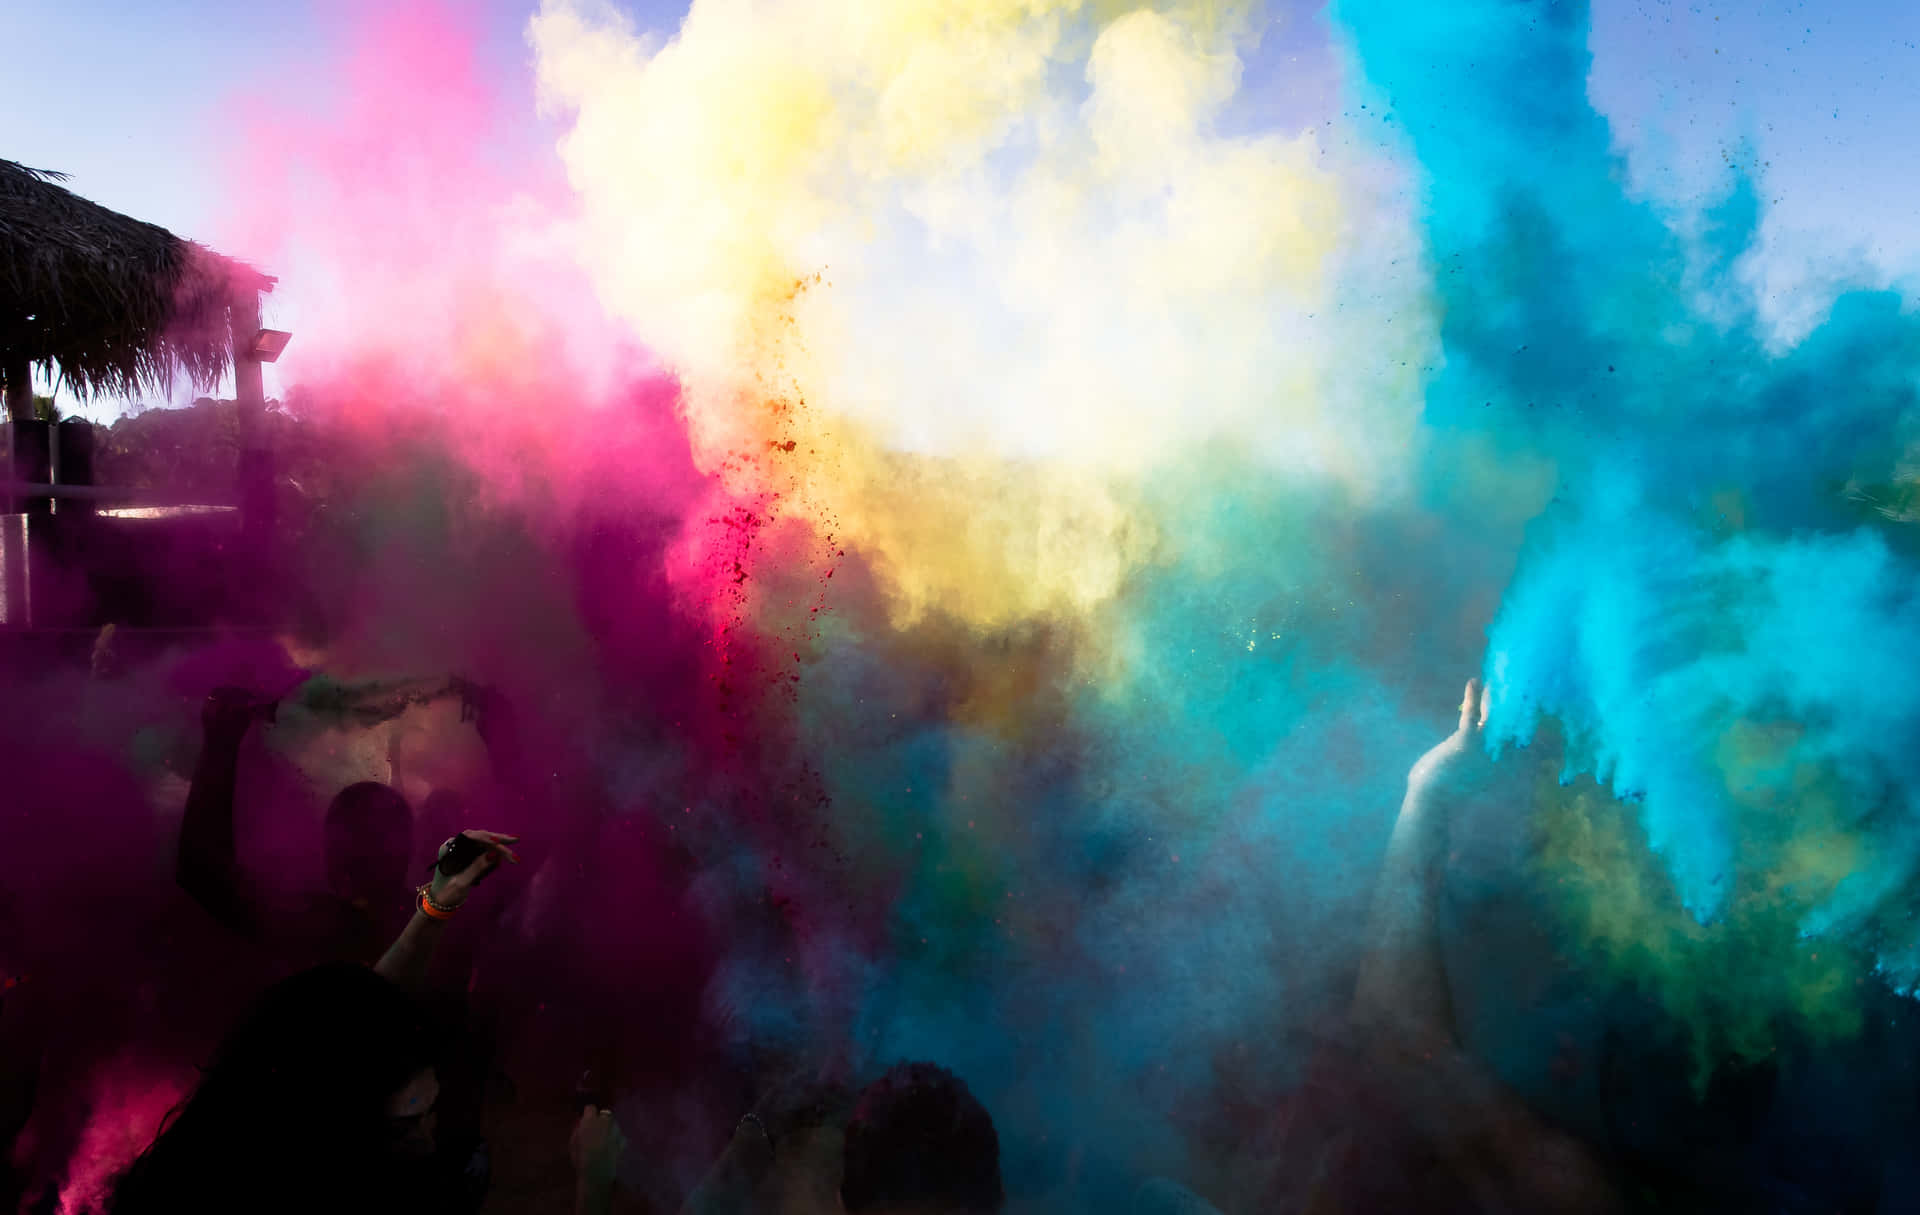 holi powder - a colorful powder that is thrown into the air